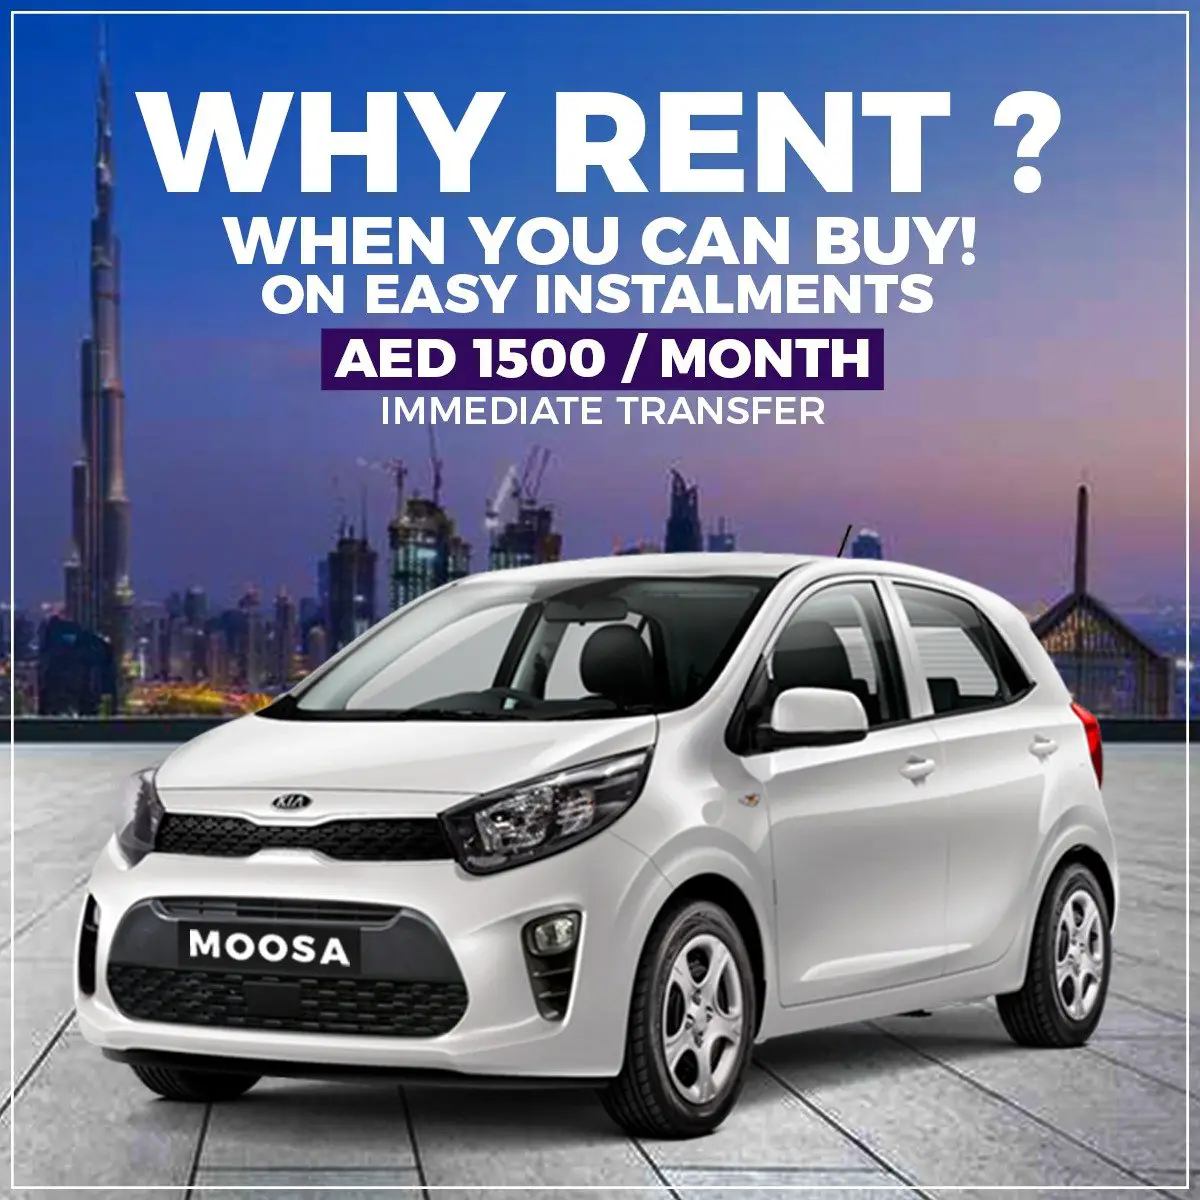 How to Find the Cheapest Car Rental in Dubai?